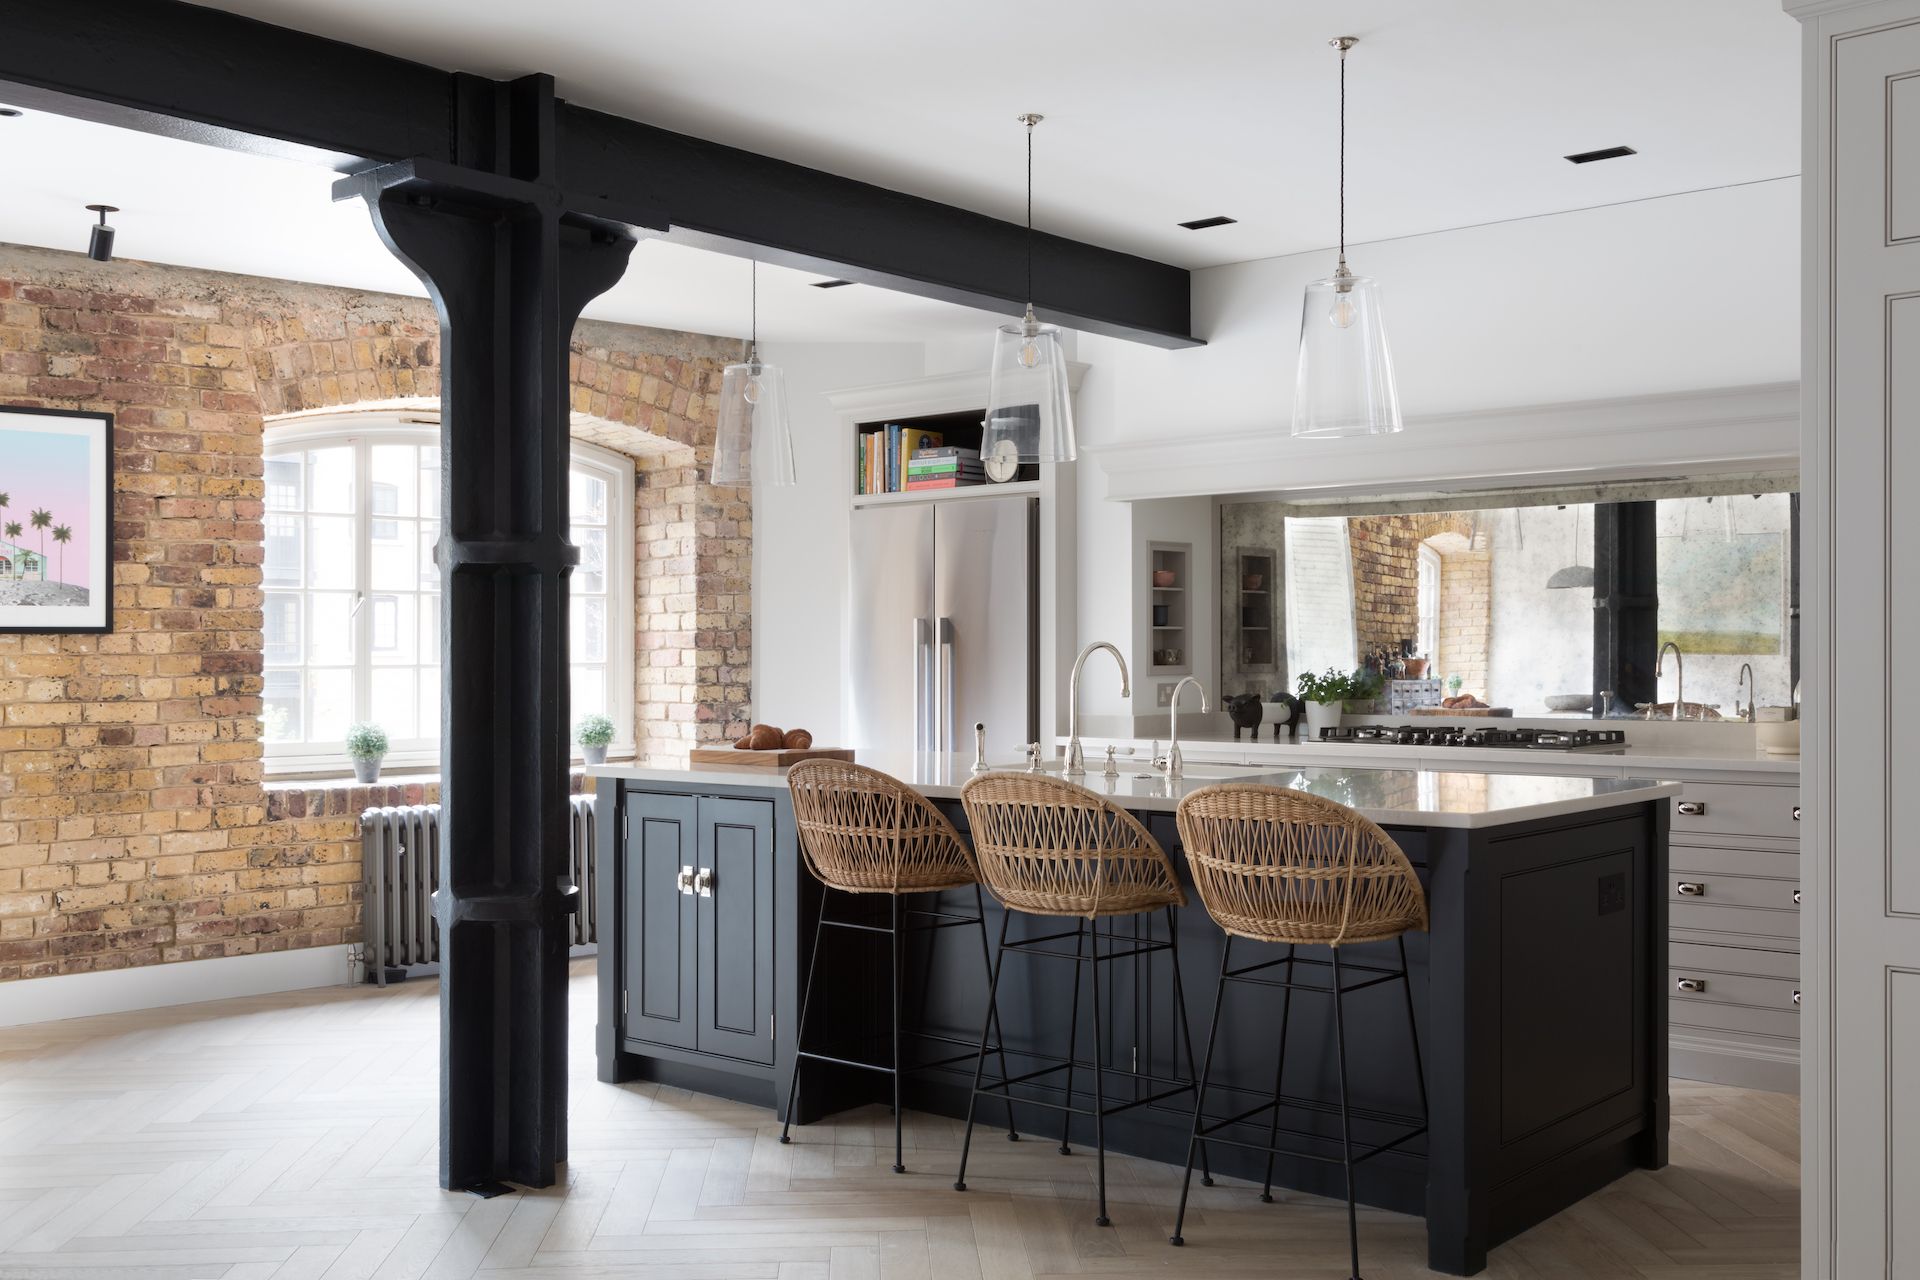 How To Plan Your Kitchen Project | Q&A With Creative Director Louisa Eggleston